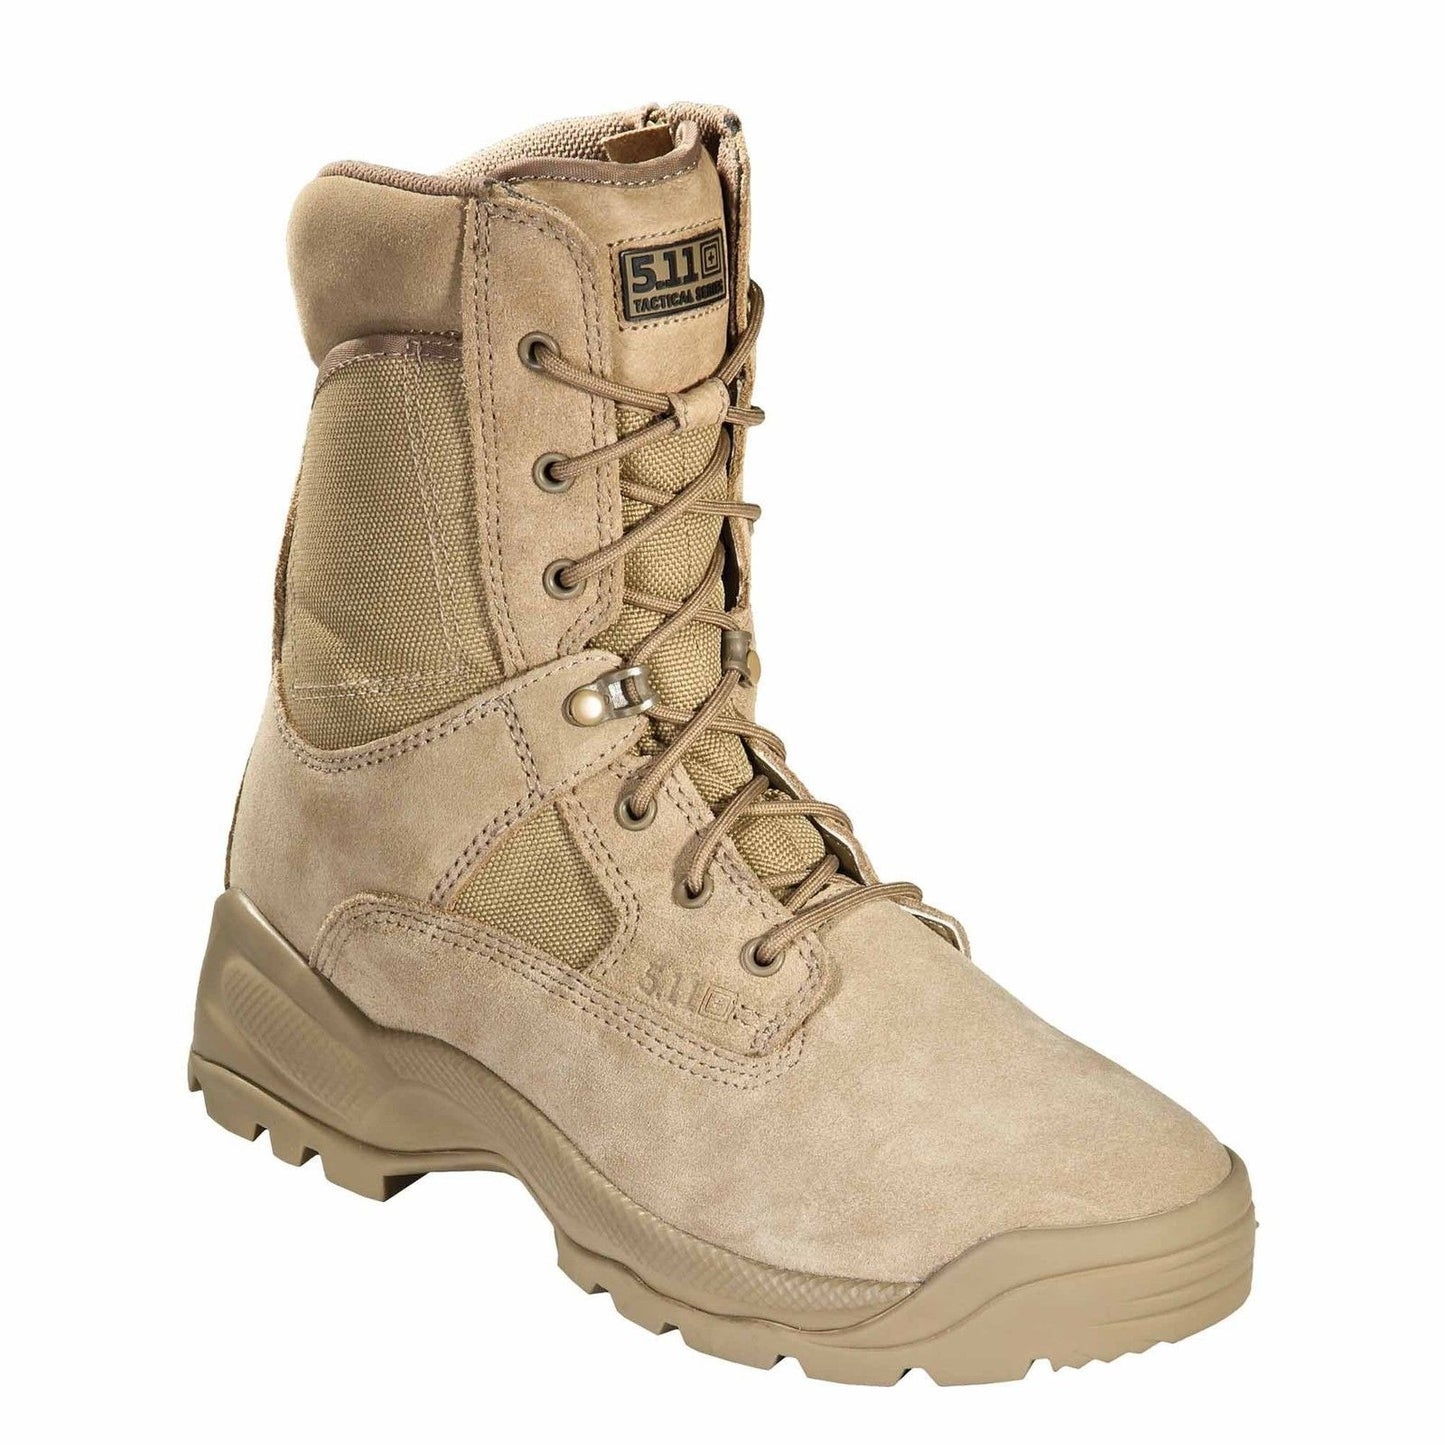 5.11 Mens ATAC 8" Coyote Tactical Boots - Tan Side Zip Field Duty Work Boot